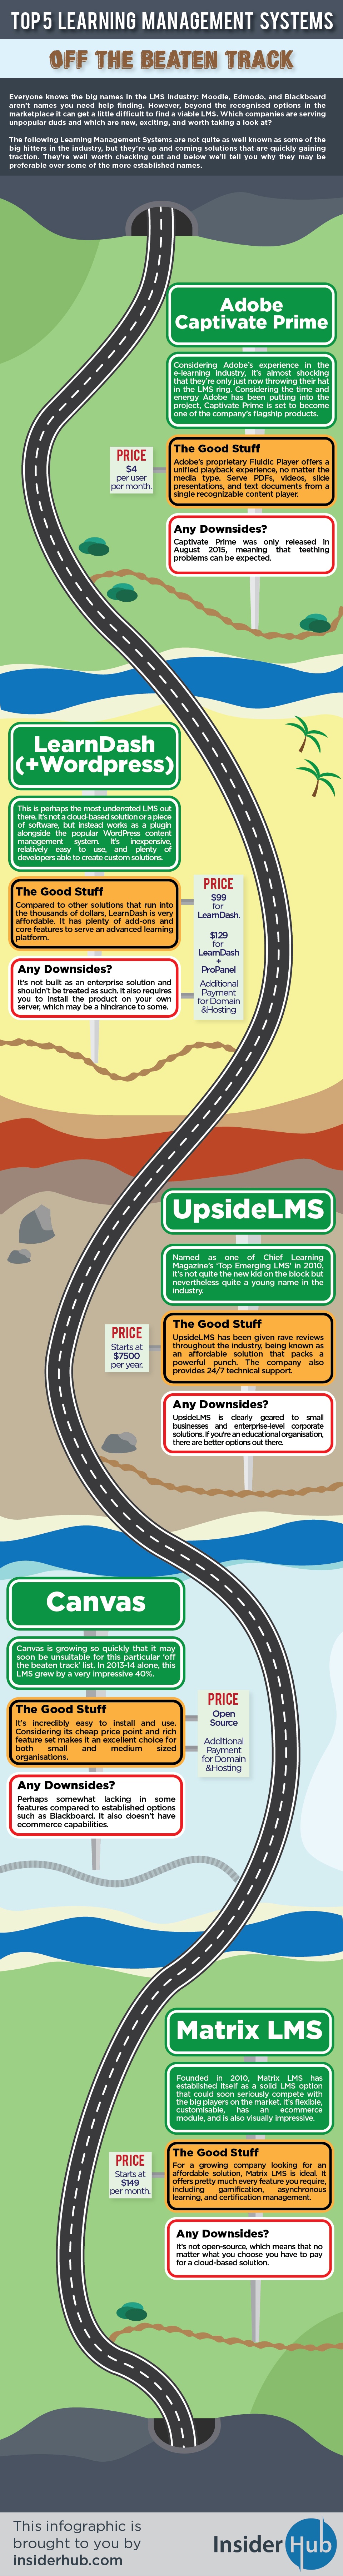 Top 5 LMSs Off the Beaten Track Infographic